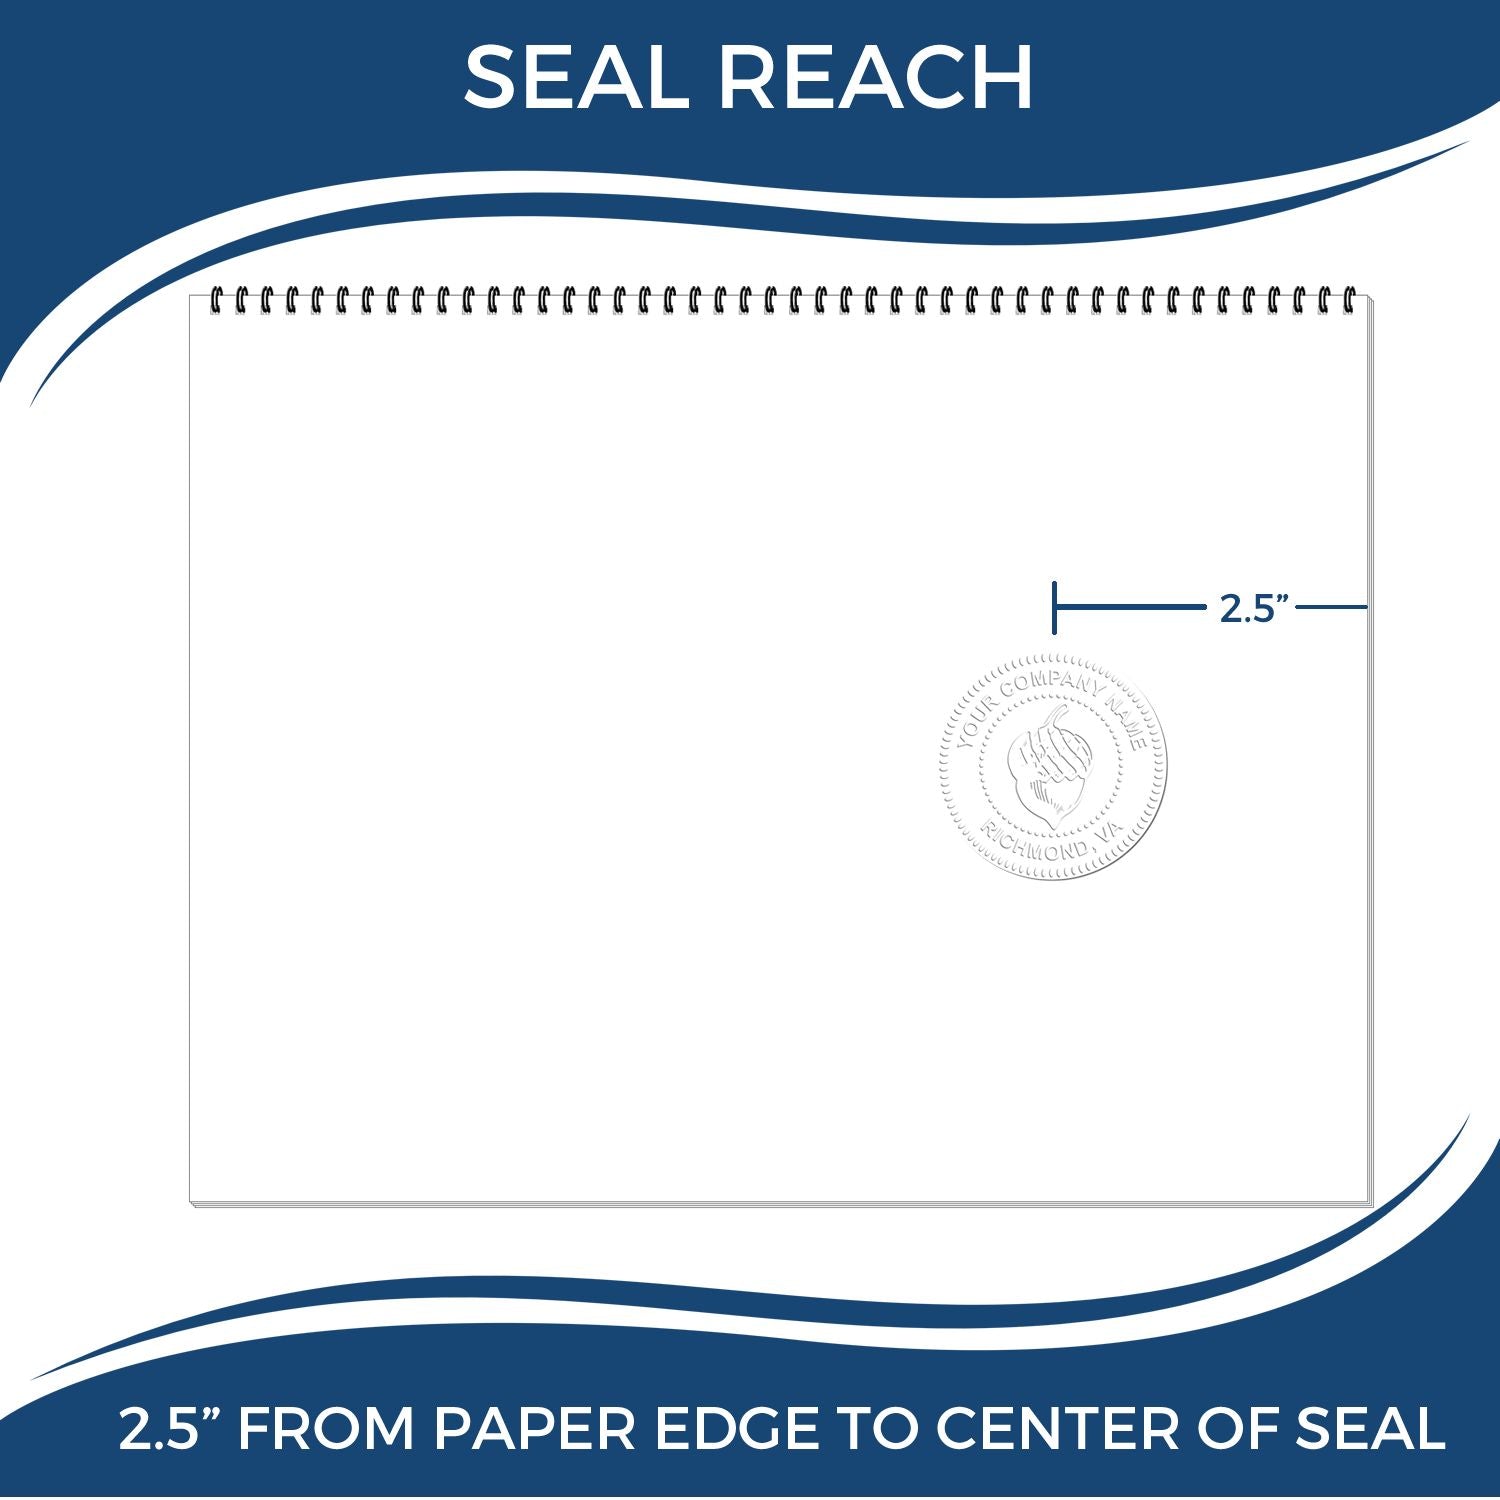 An infographic showing the seal reach which is represented by a ruler and a miniature seal image of the Long Reach New York PE Seal